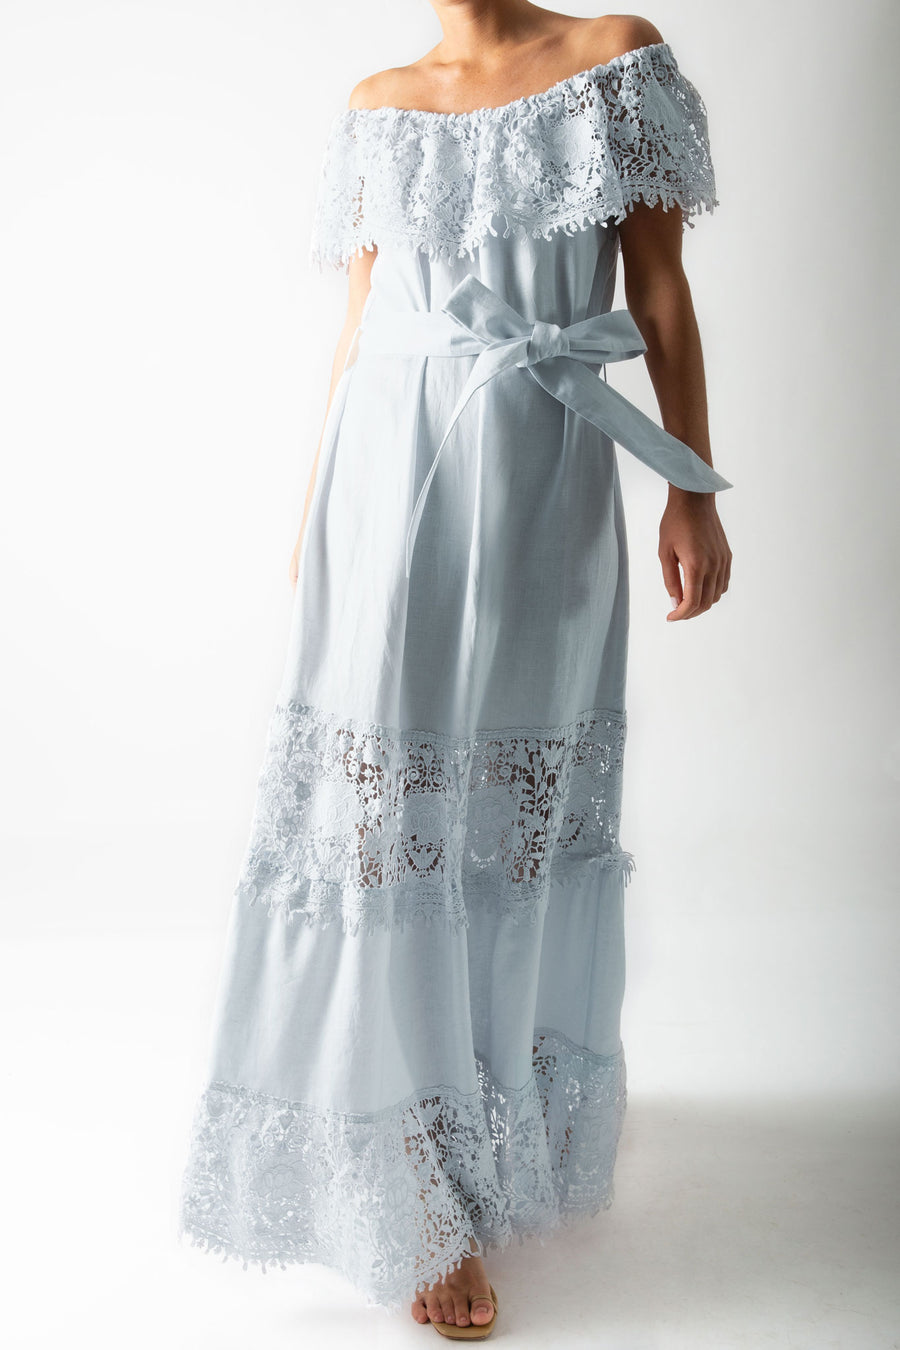 This is a photo of a woman wearing a light blue maxi dress with lace trim across the shoulders, a linen sash for a belt, and tiers of linen and lace down the dress skirt.